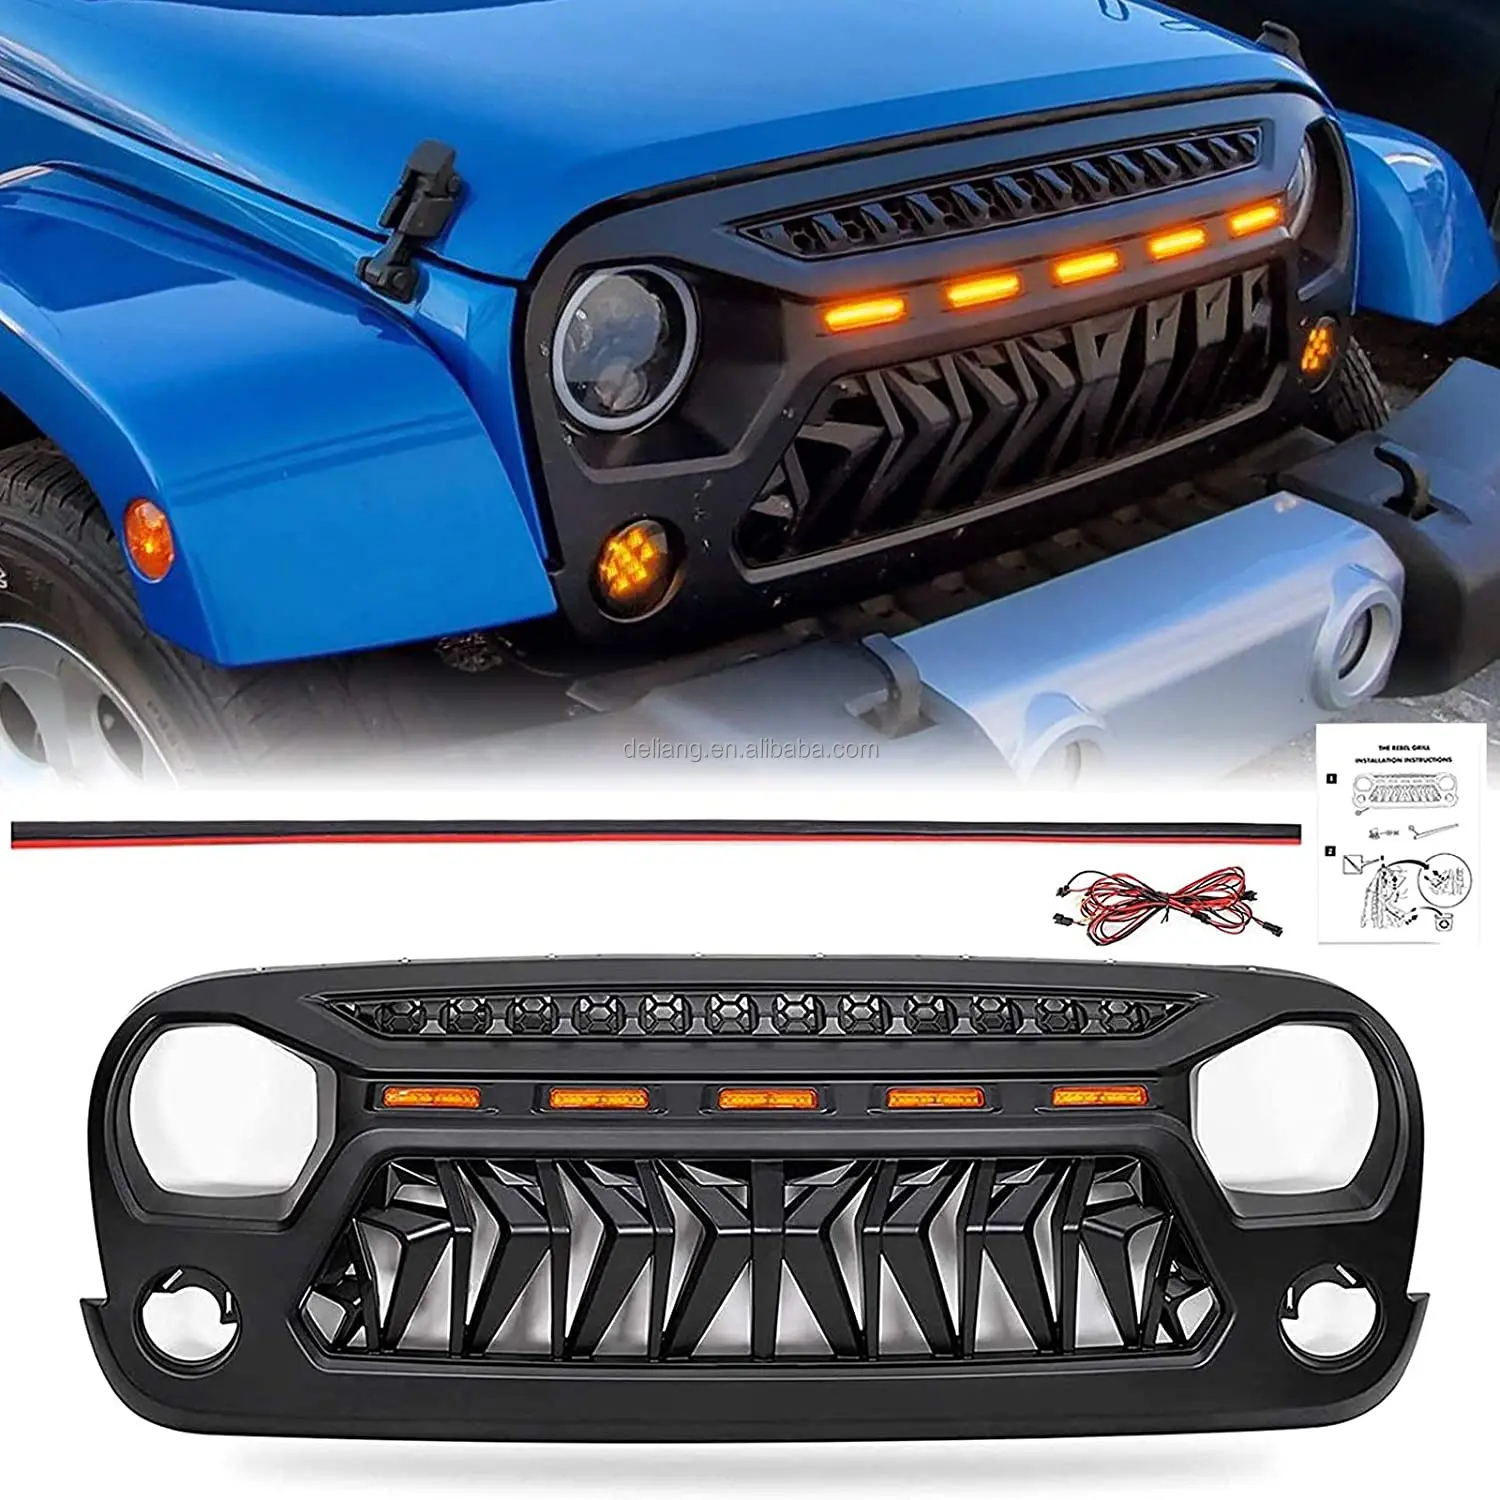 China Jeep Wrangler Jk Accessories, Jeep Wrangler Jk Accessories  Manufacturers, Suppliers, Price | 2pcs Car Front Headlight Grill Cover  Protector Iron Black Replacement For Wrangler Jk 20072017 